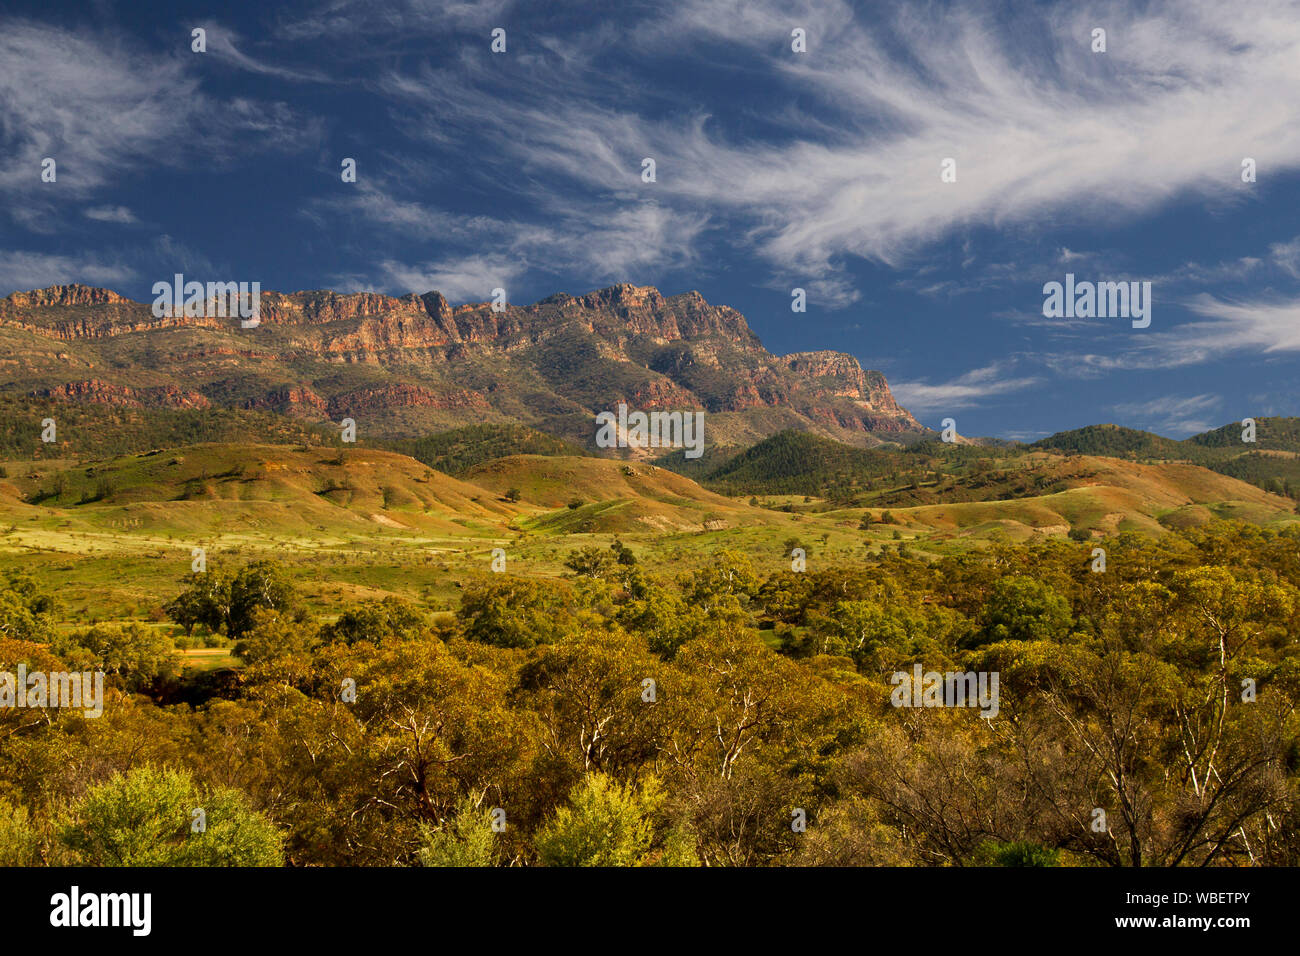 Stunning colourful landscape in Flinders Ranges National Park with rugged red rocky ranges reaching up into blue sky streaked with clouds, South Aust Stock Photo